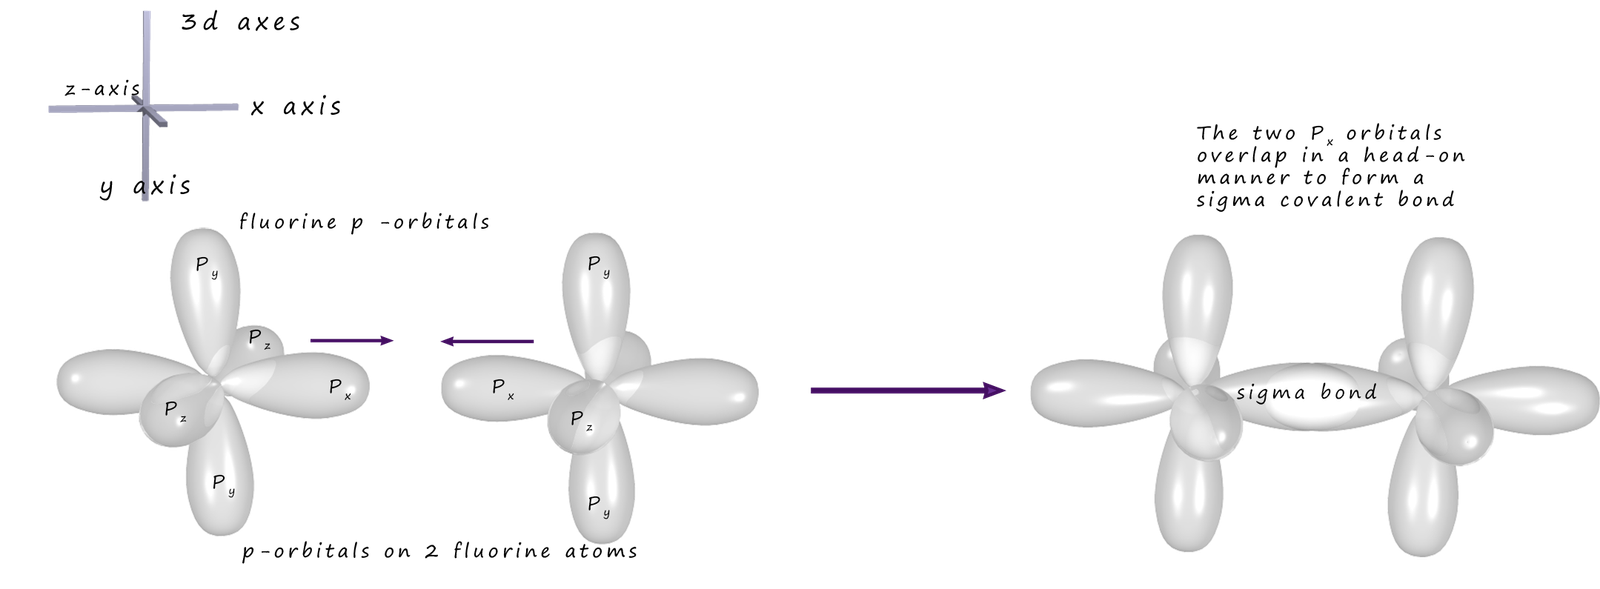 Diagram showing the head on overlap of p-orbitals in two fluorine atoms to form a sigma covalent bond.